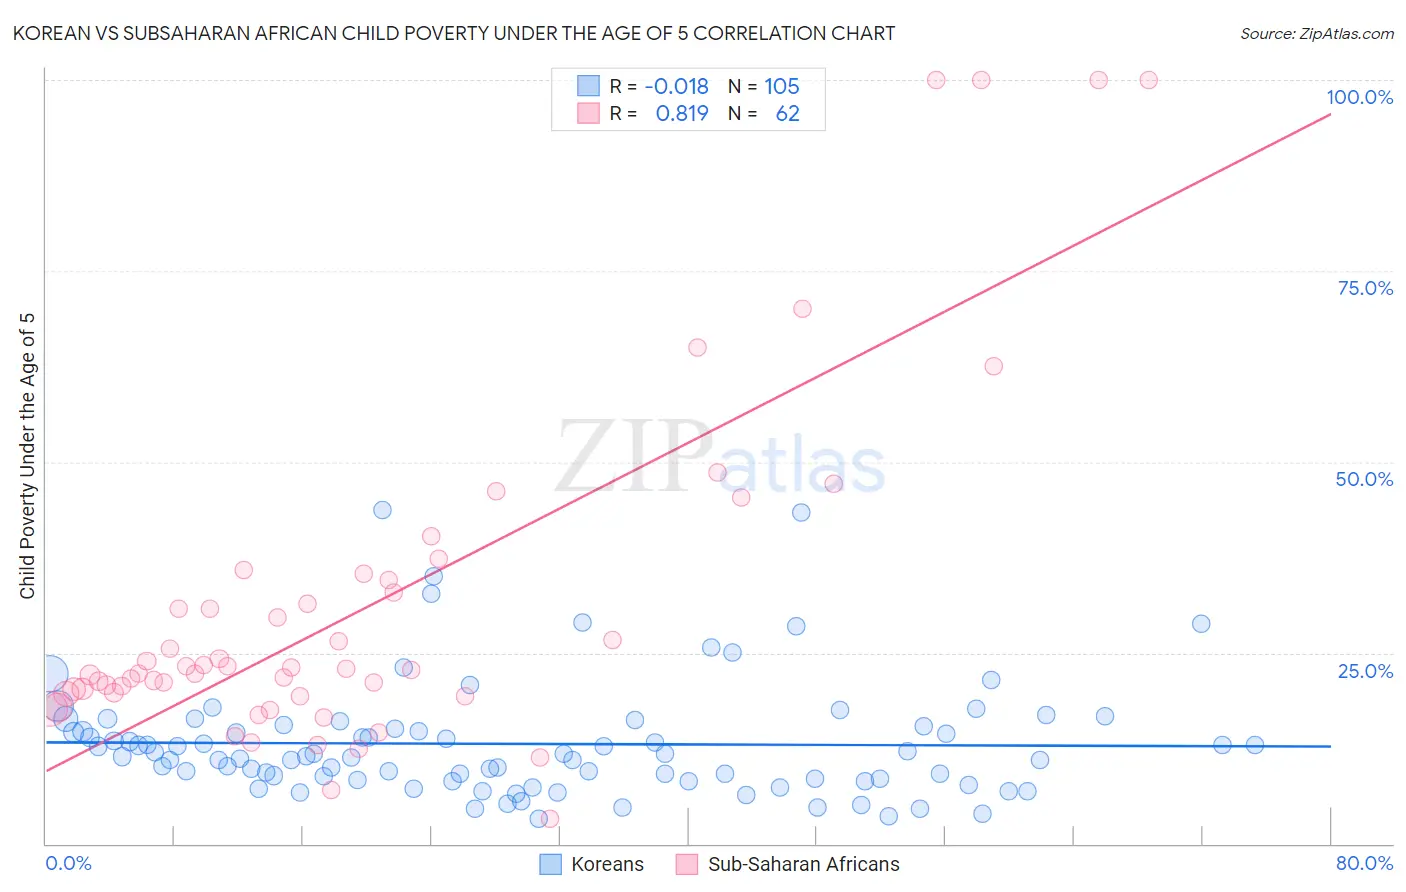 Korean vs Subsaharan African Child Poverty Under the Age of 5